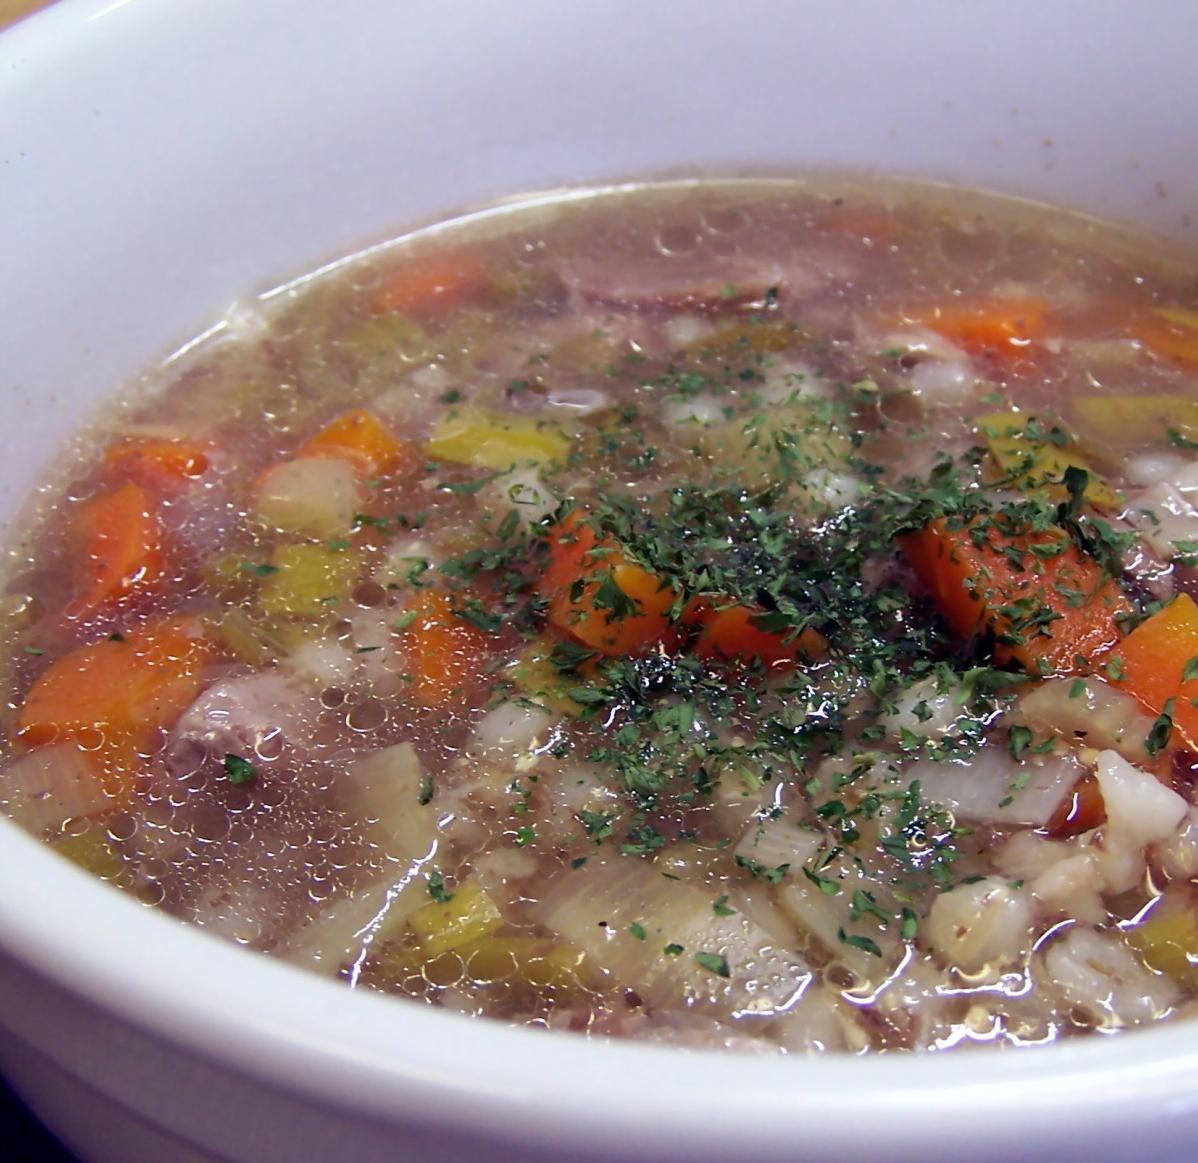  This classic Scottish soup is a comforting dish that's sure to become a family favorite.